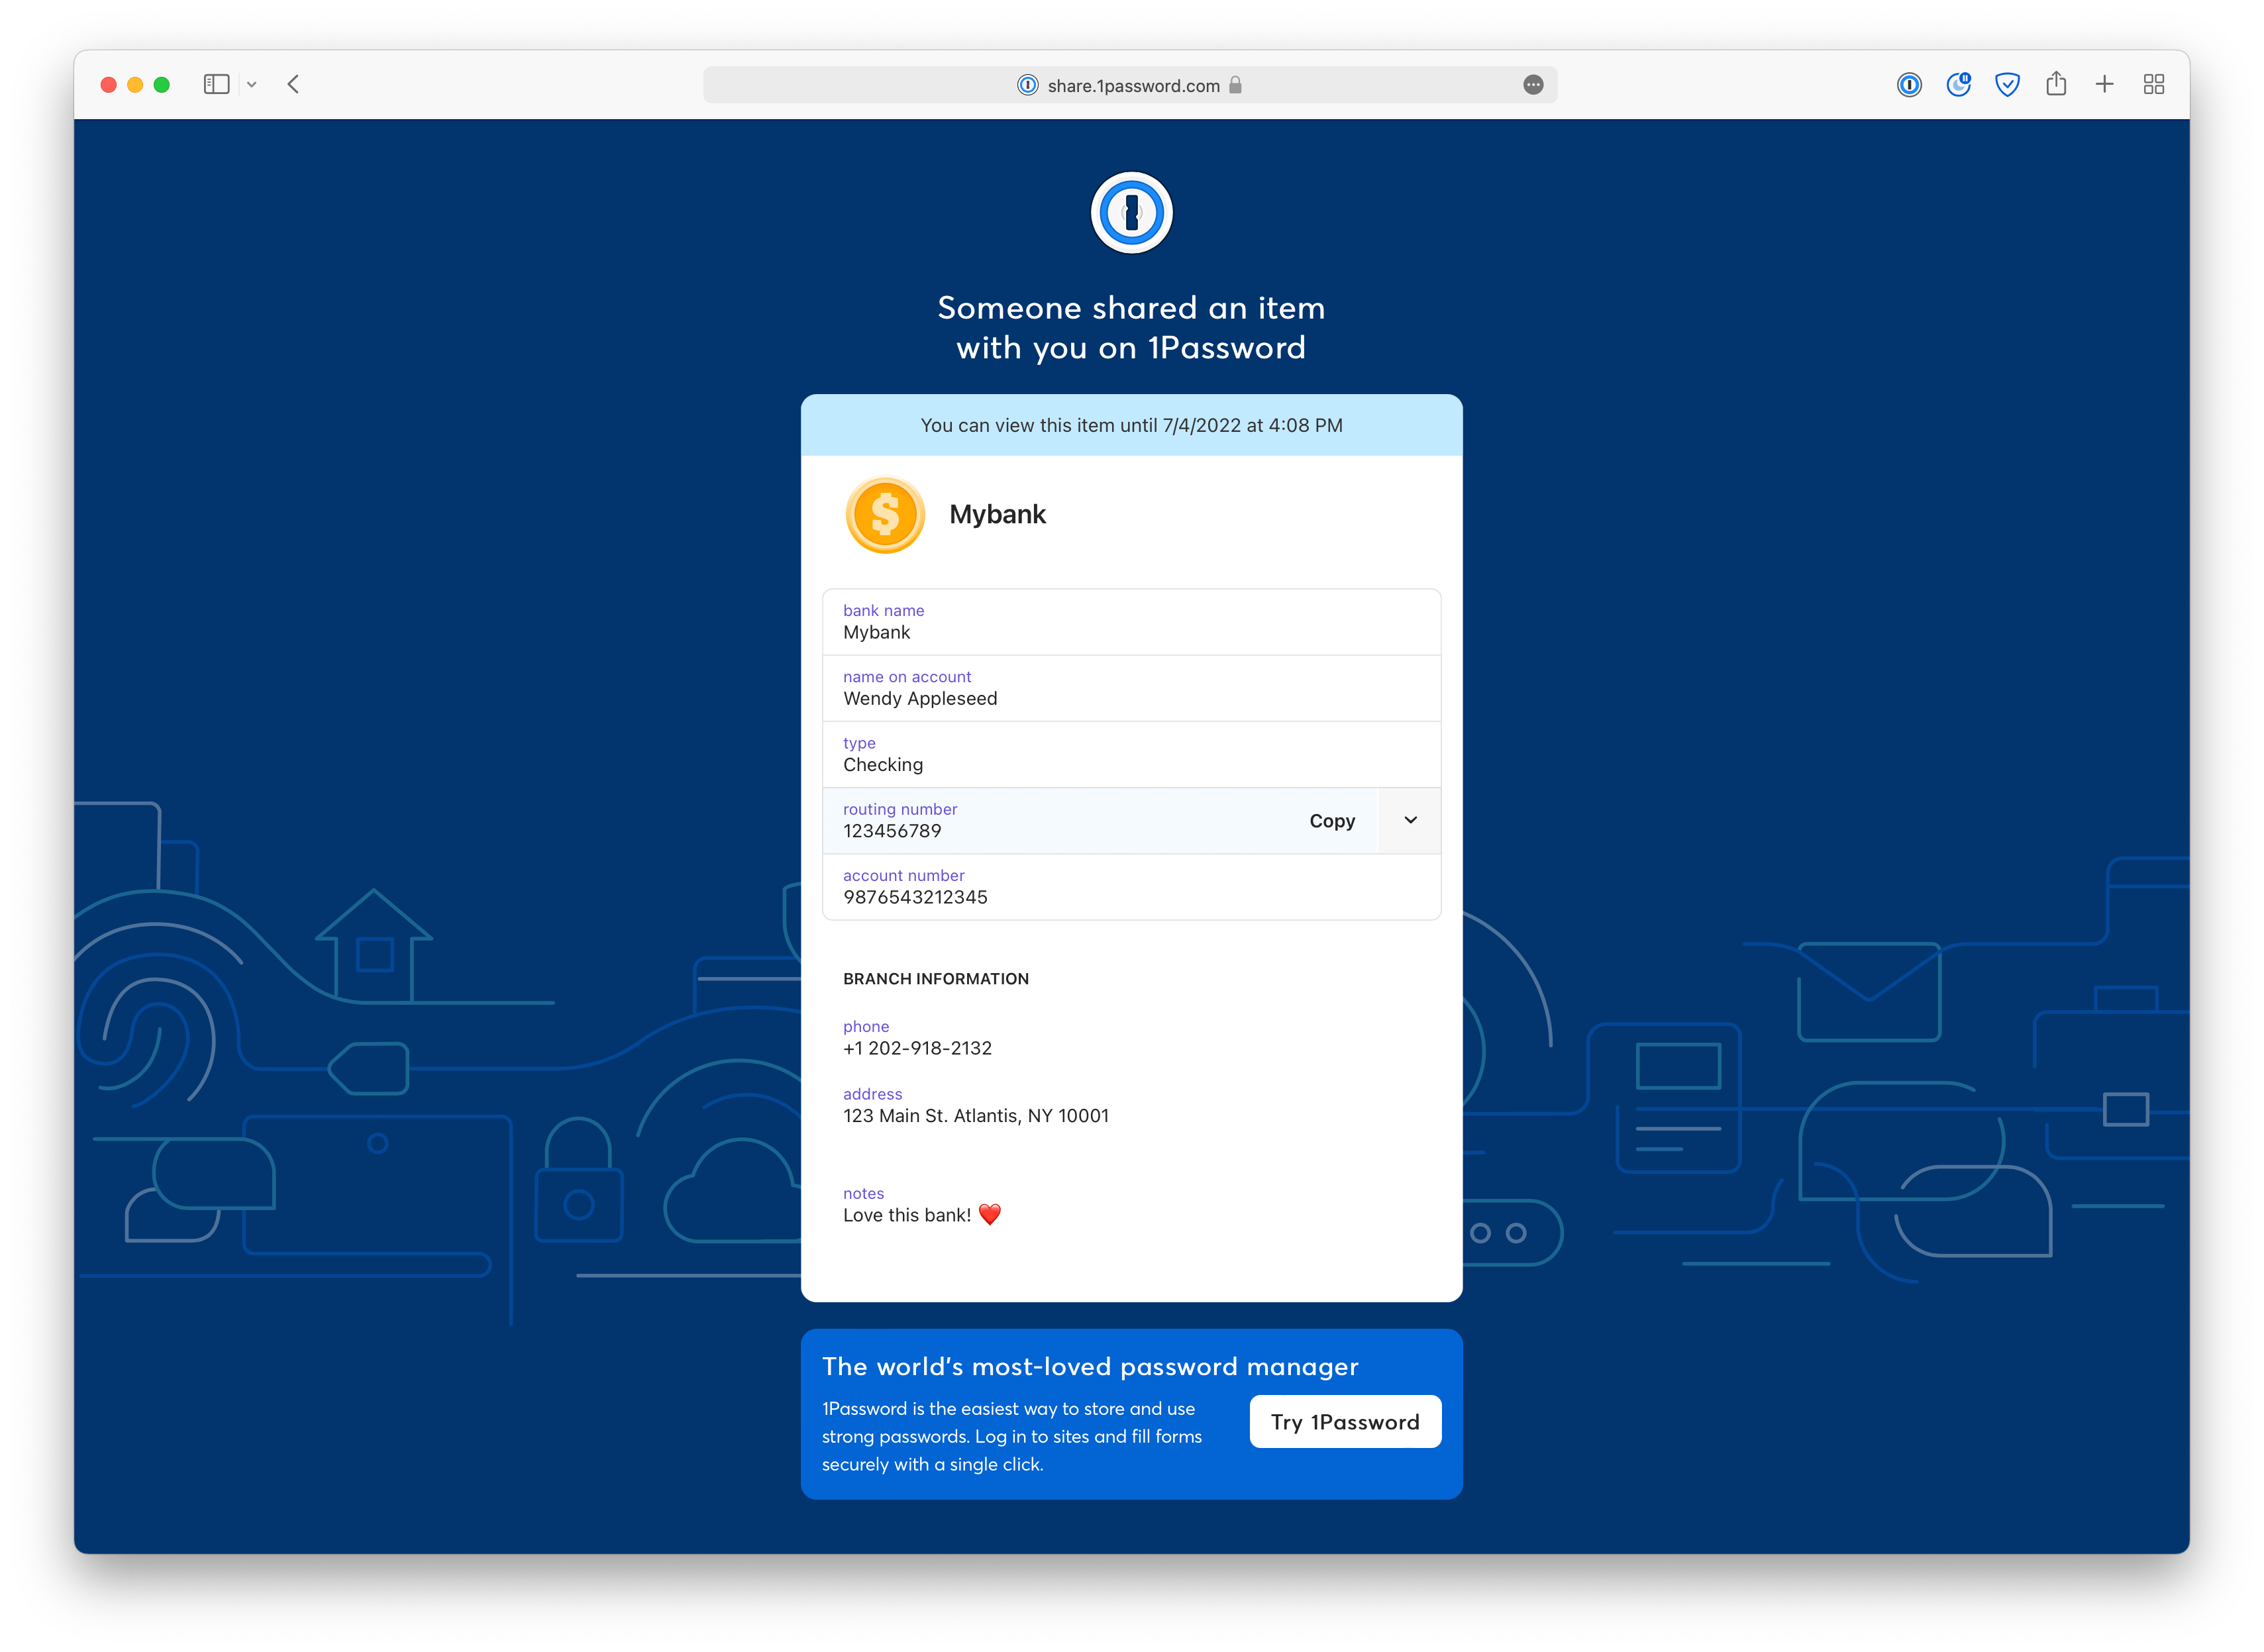 Recipient view of bank account shared with 1Password